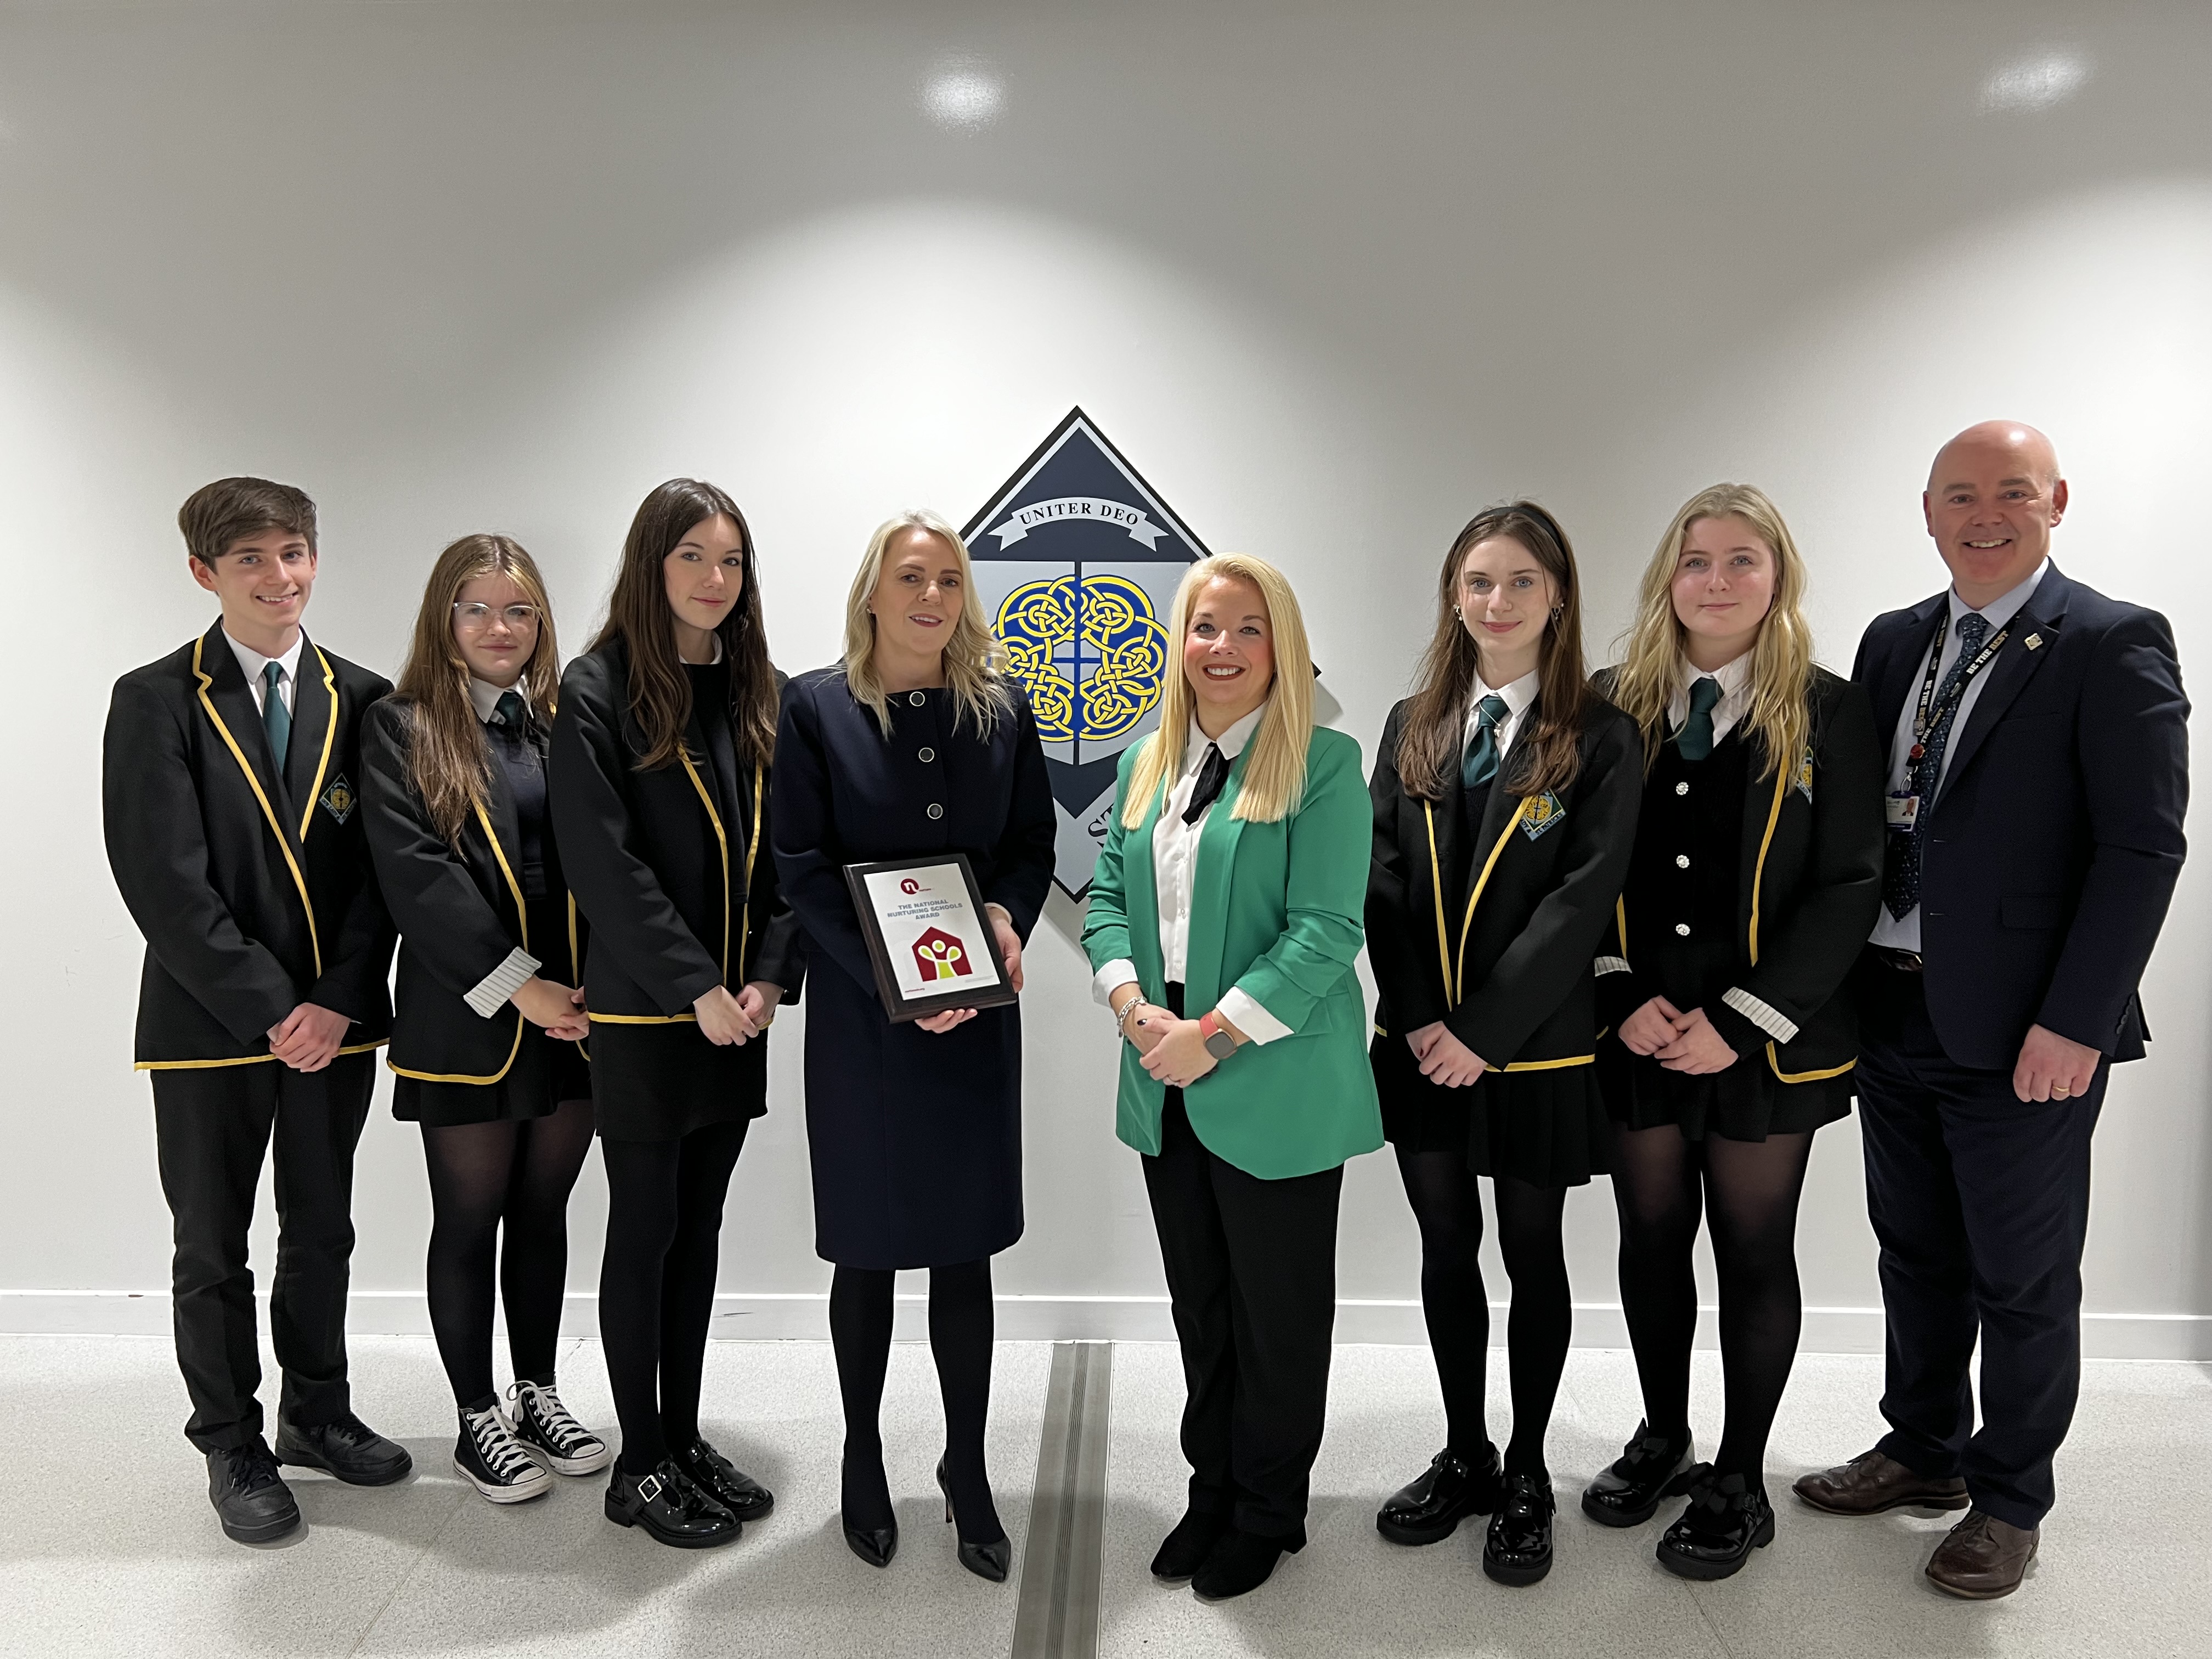 Our Lady and Saint Patrick’s High School pupils with Councillor Steel and Head teacher, school awarded the National Nurturing School Award